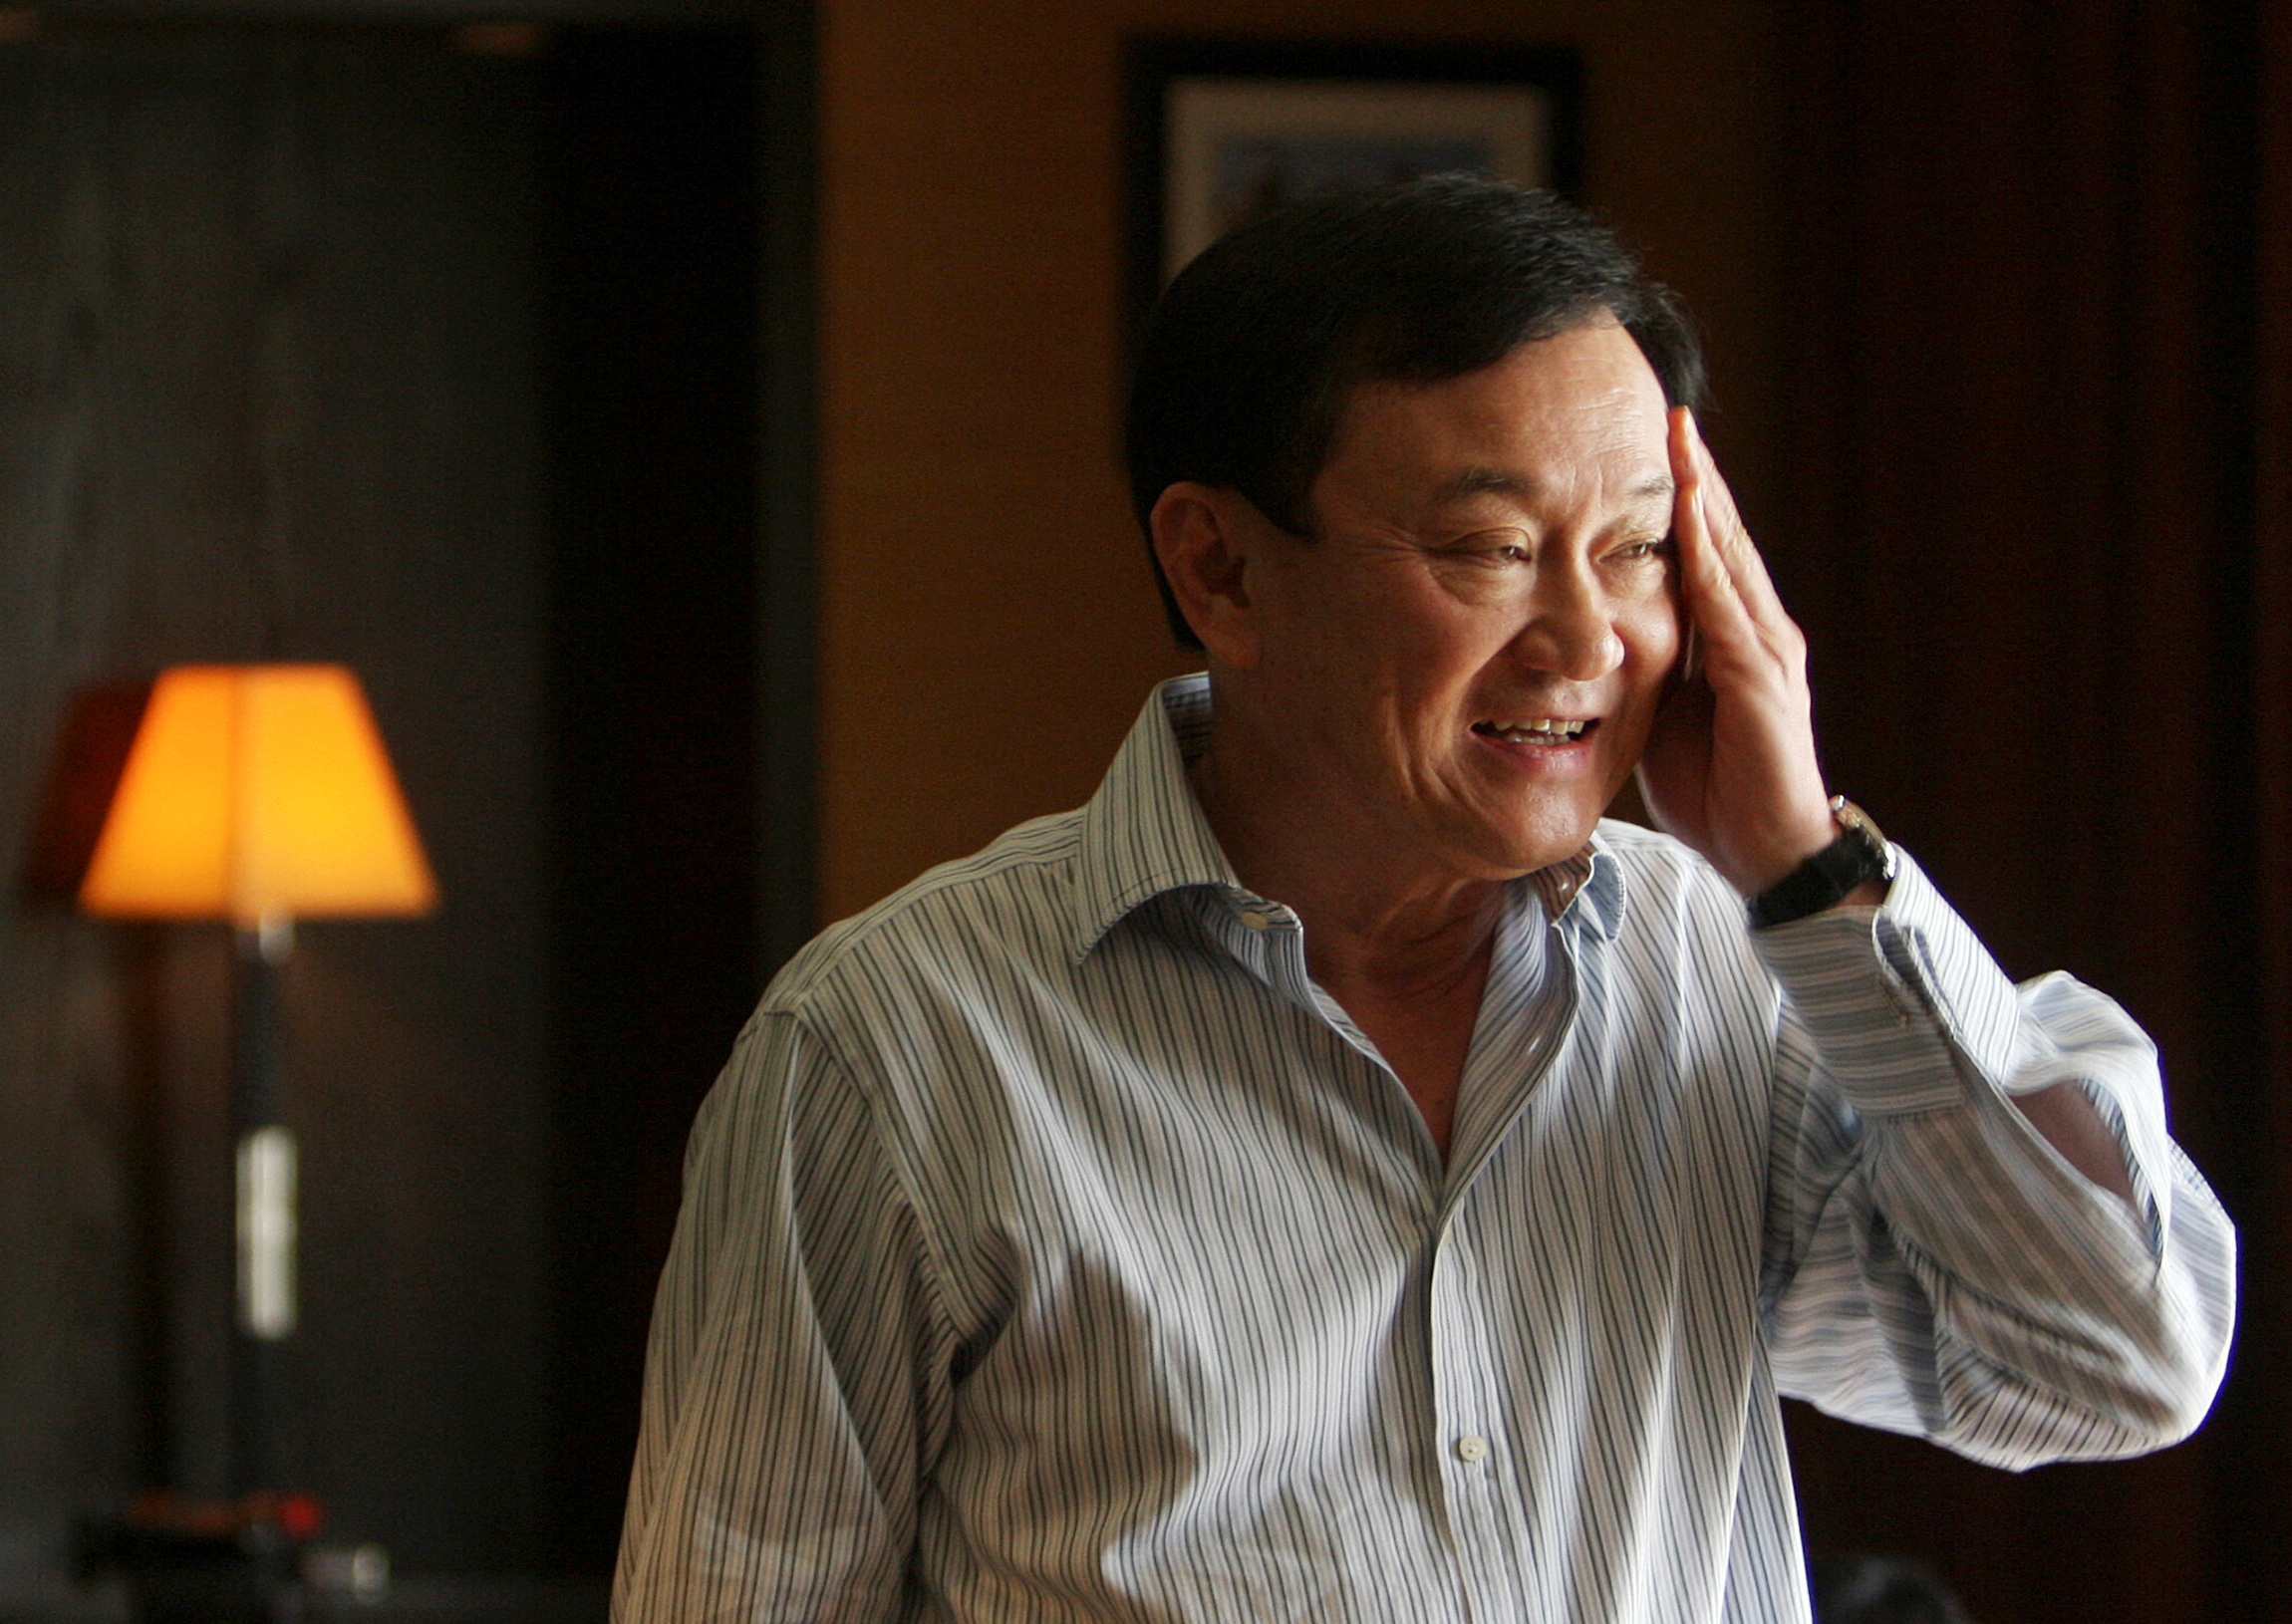 FILE PHOTO: Thailand‘s former prime minister Thaksin Shinawatra smiles during a meeting near his home in Dubai July 3, 2011. REUTERS/Jumana El Heloueh/File Photo